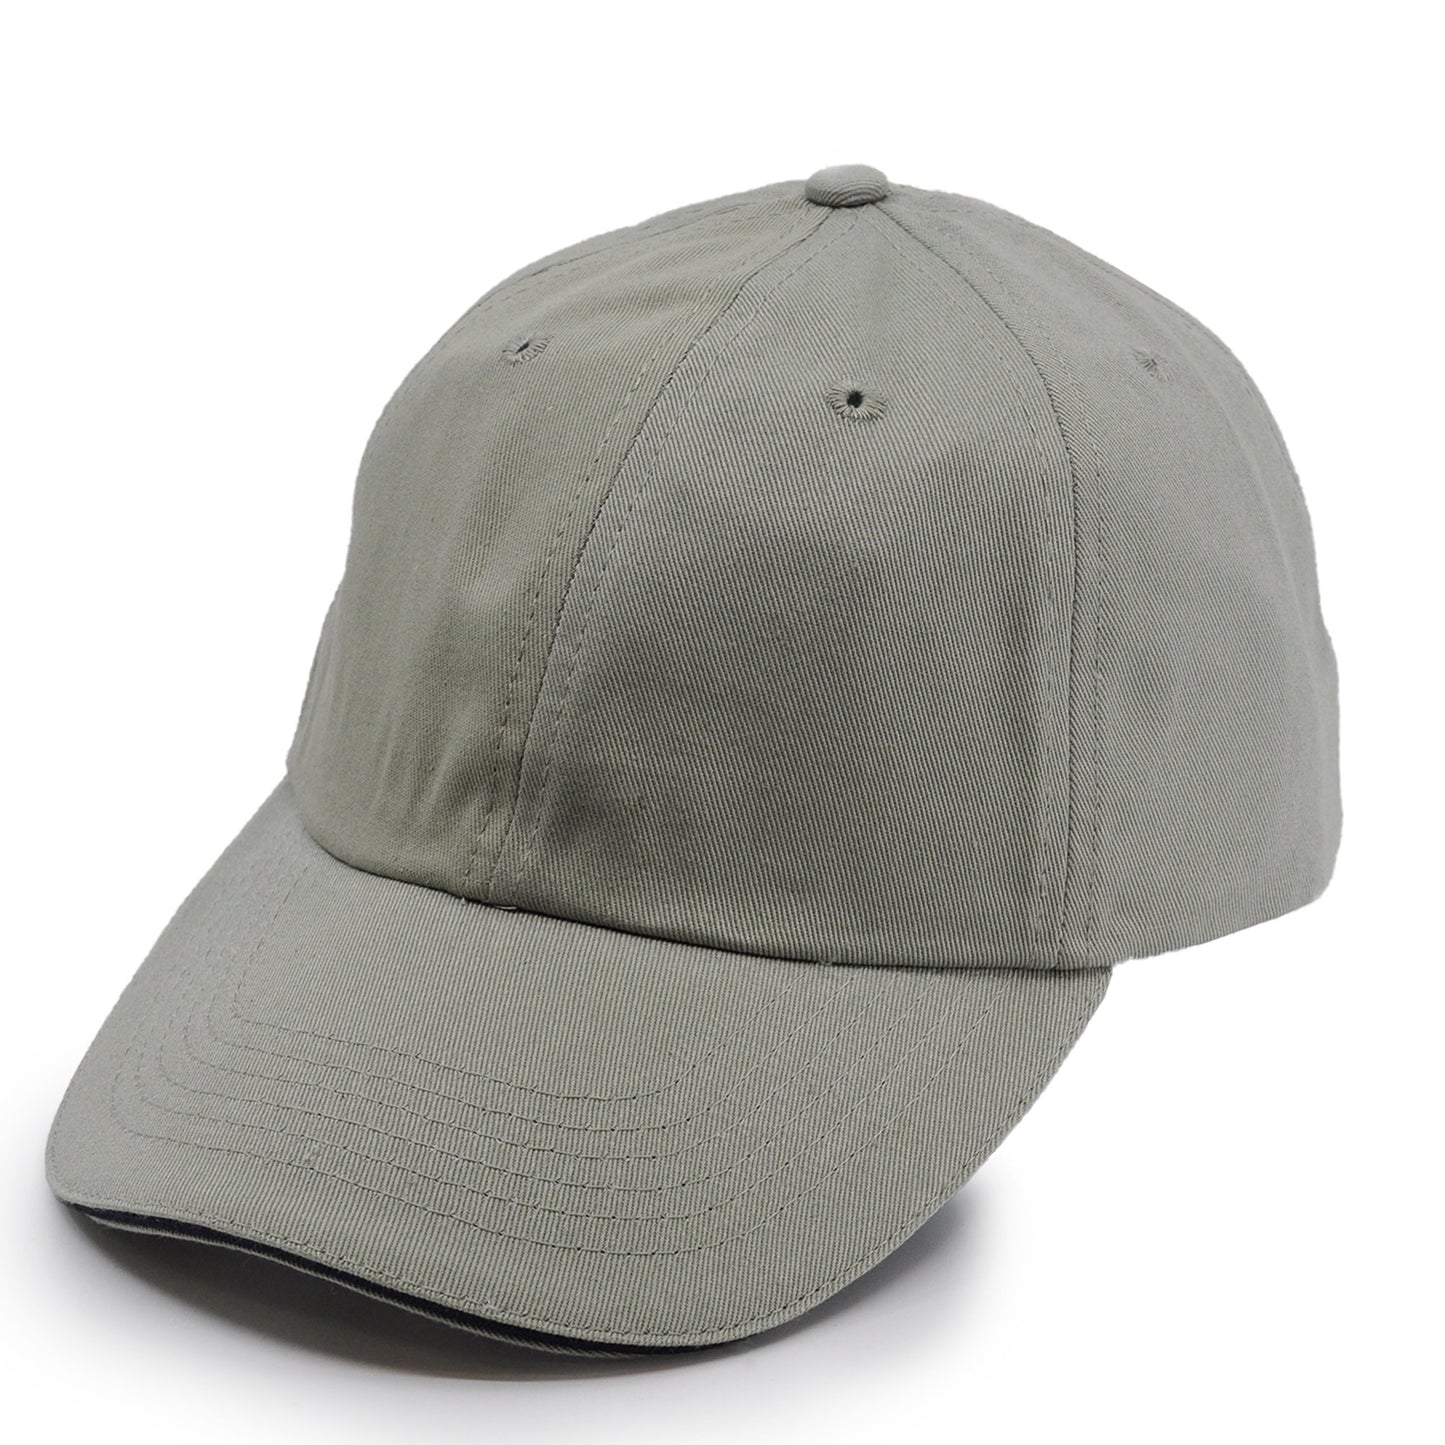 River Beach 100% Cotton Unisex Sports Cap, in color Grey. Front View.